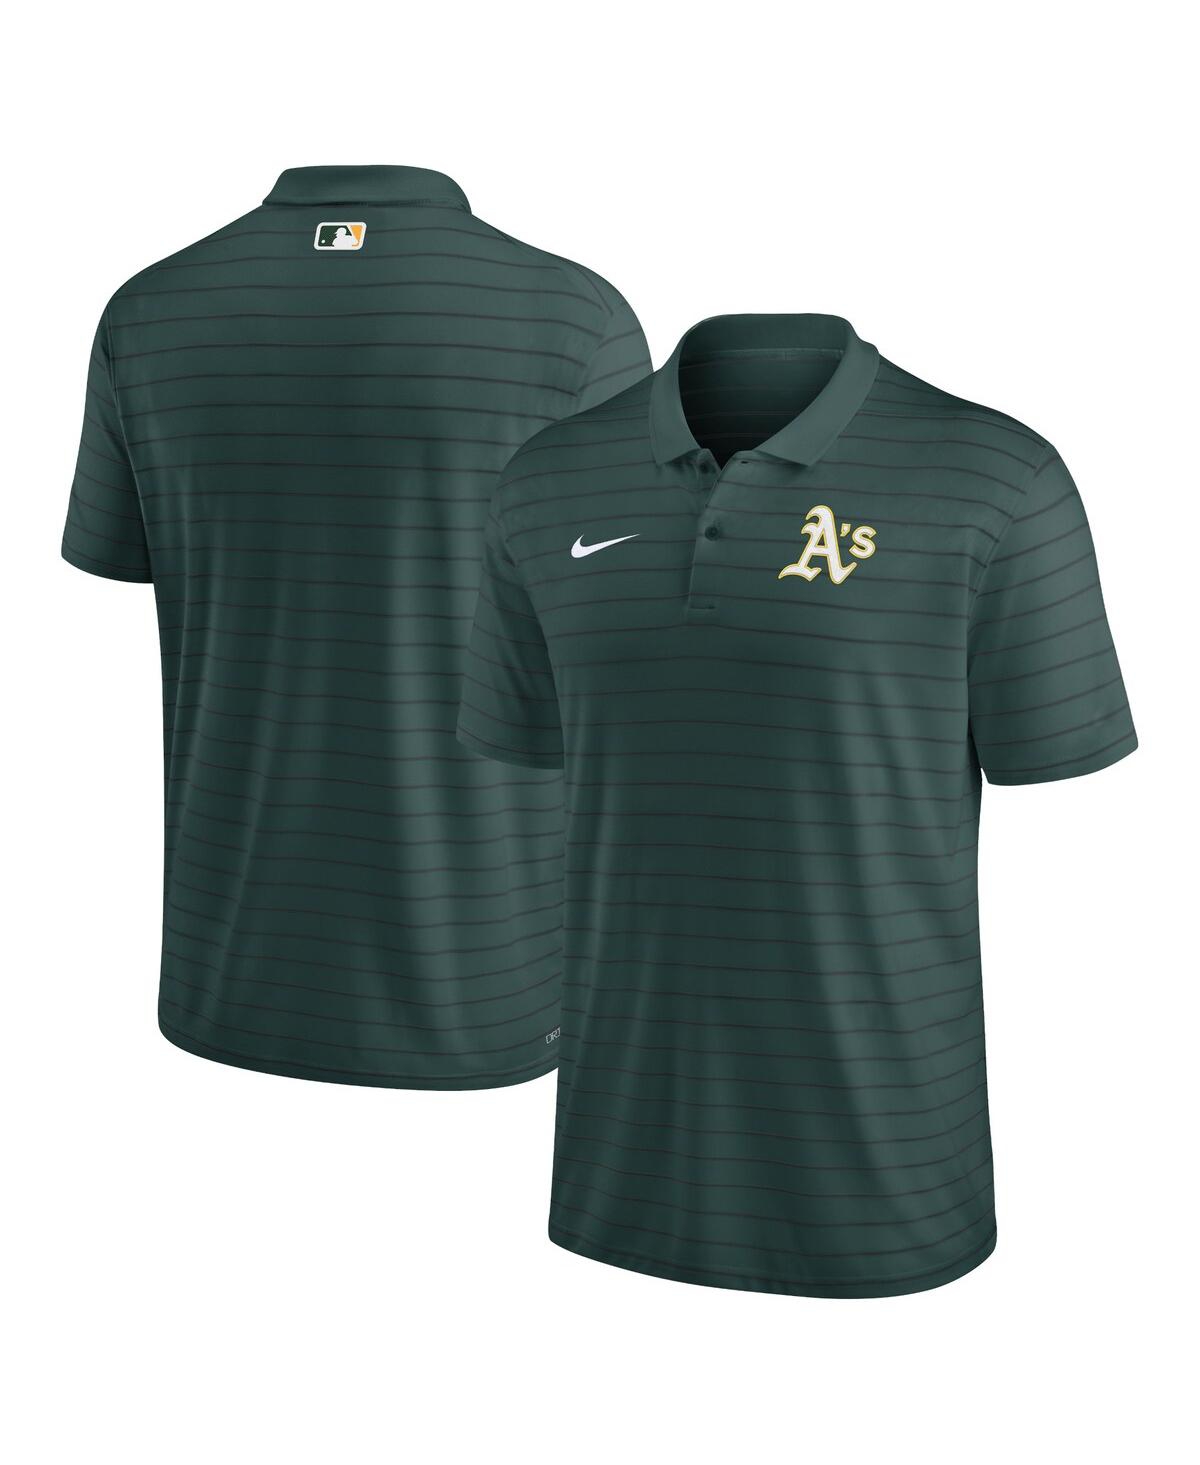 Nike Men's  Green Oakland Athletics Authentic Collection Victory Striped Performance Polo Shirt